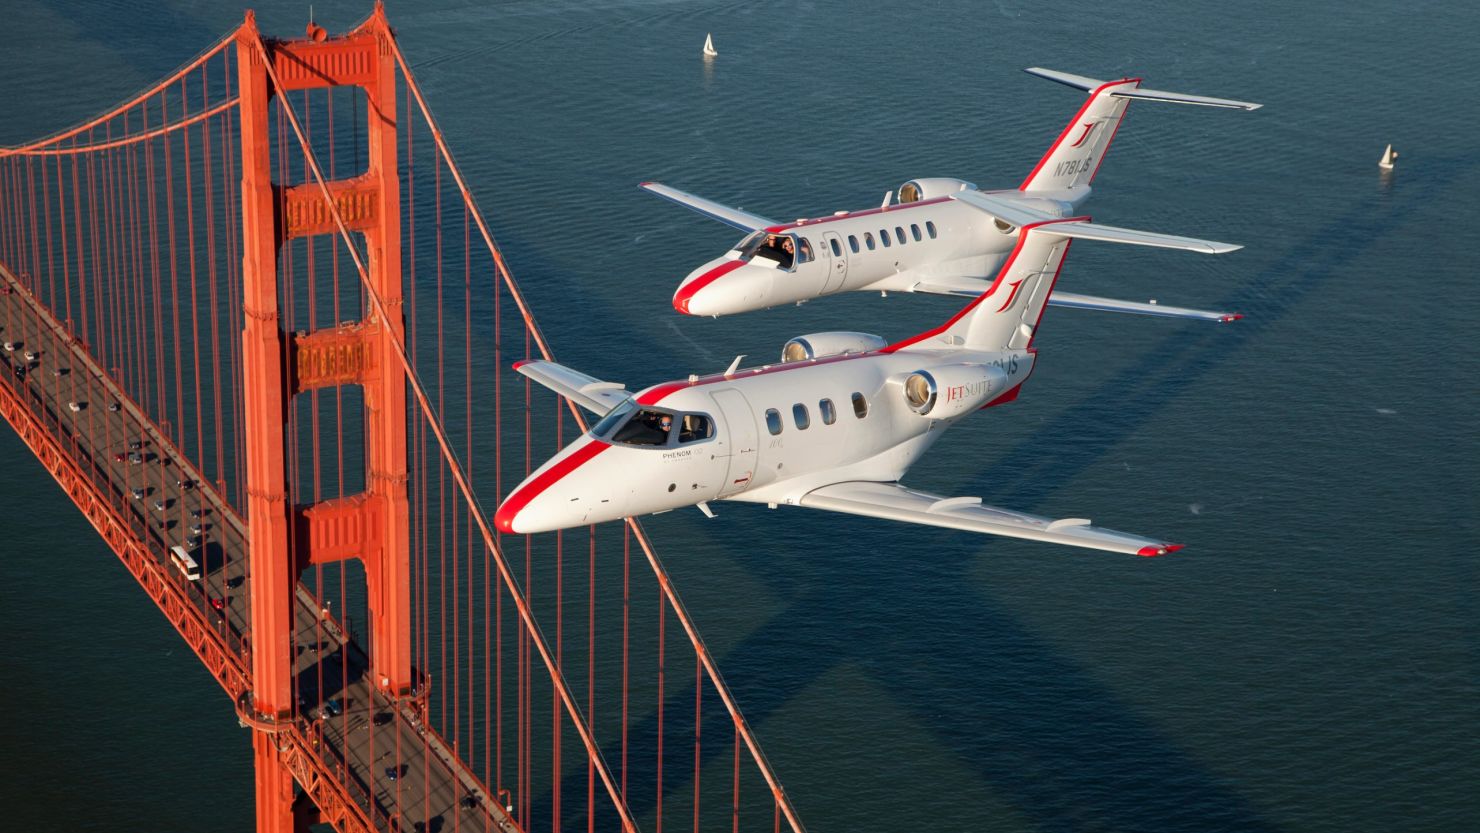 JetSuite opts for lighter and less expensive planes, which brings prices down